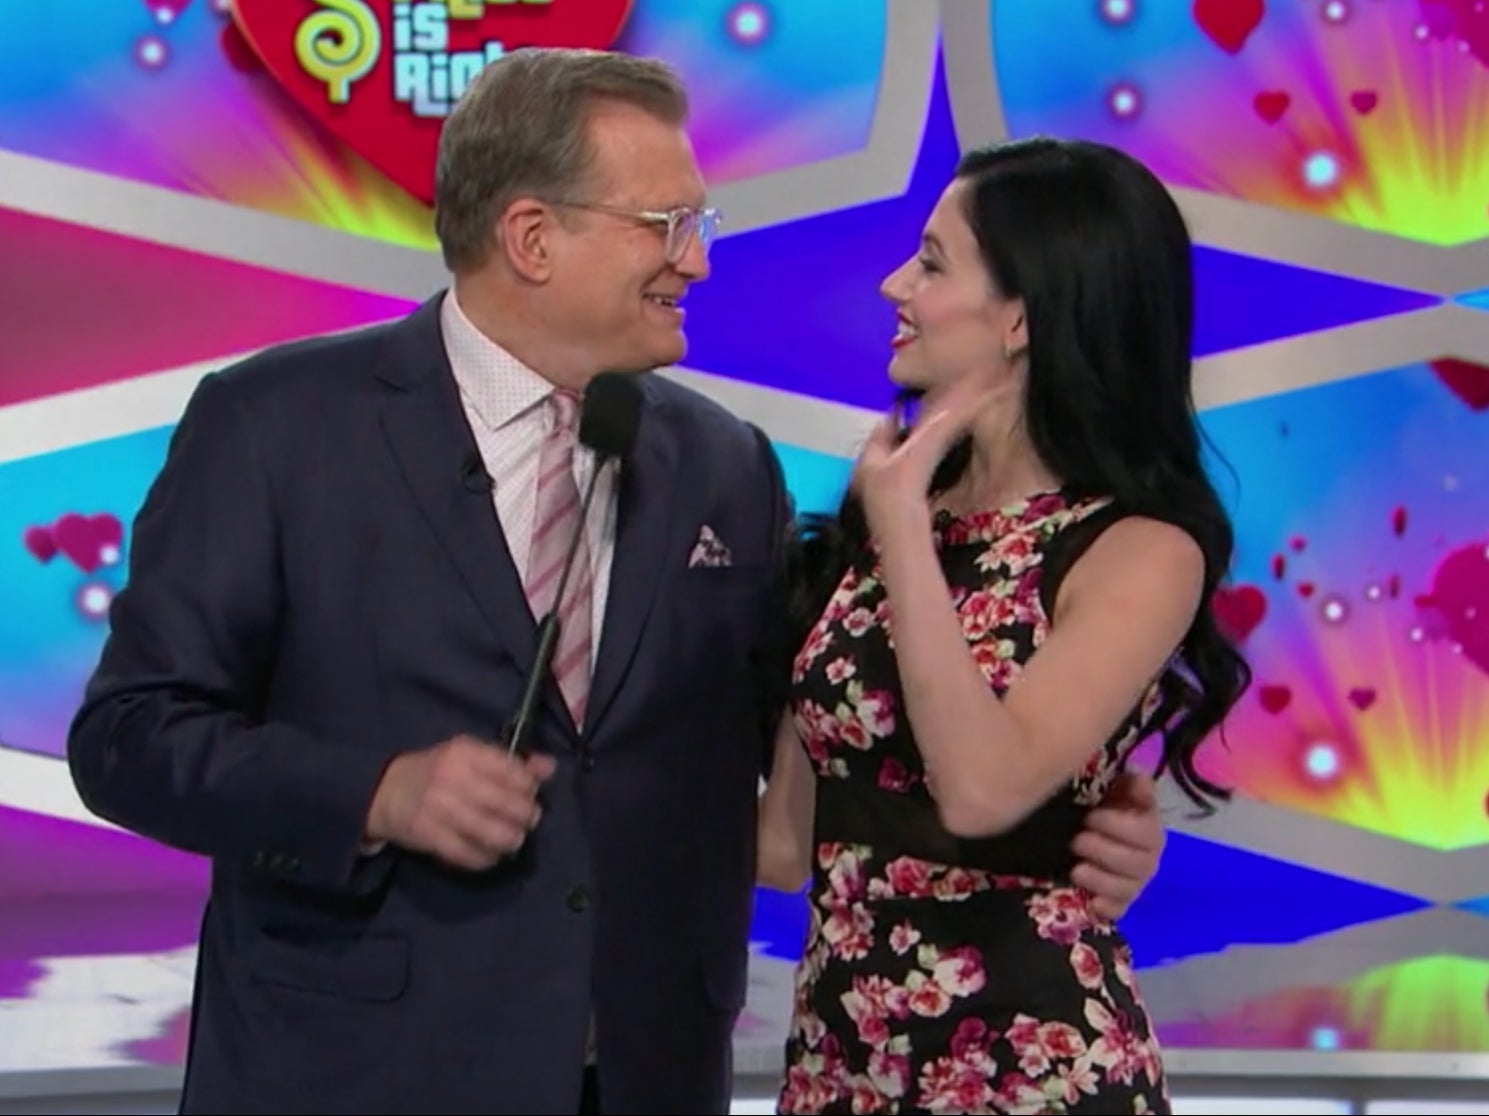 Drew Carey introduces Amie Harwick as his fiancée on the set of ‘The Price is Right’ in 2018